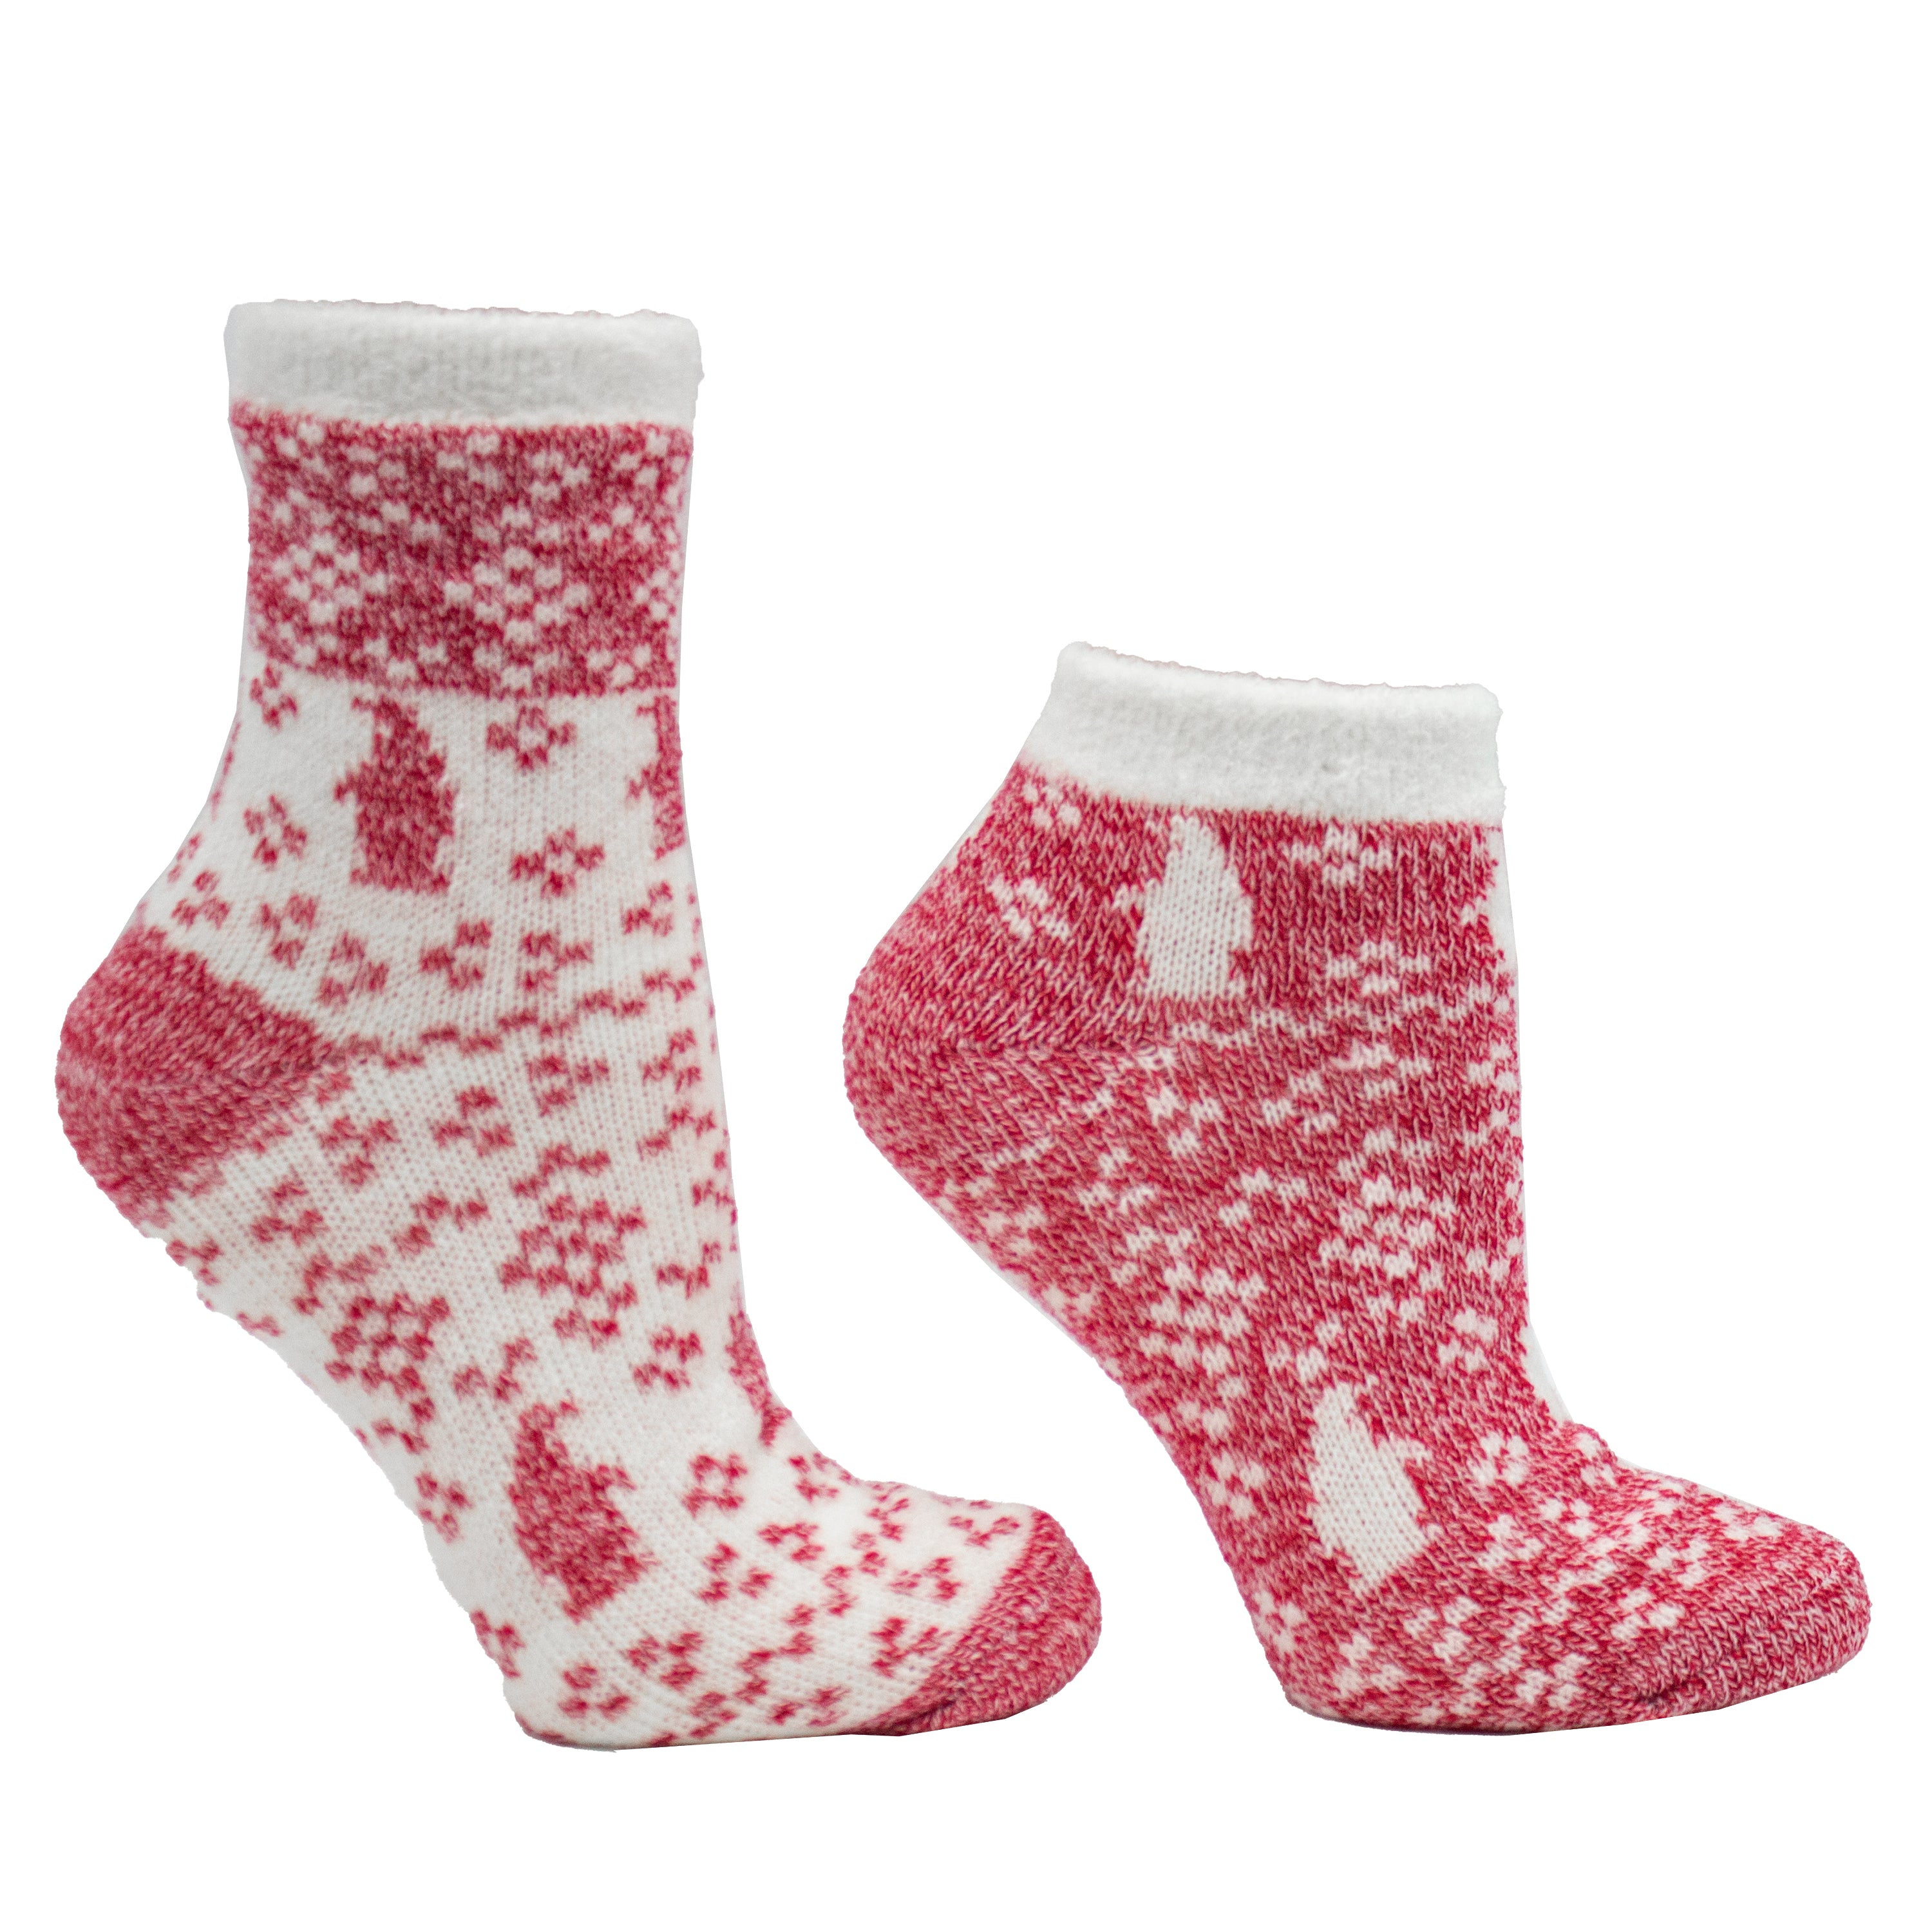 North Pole - 2 pack o of double layer socks Rose N Shea butter infused